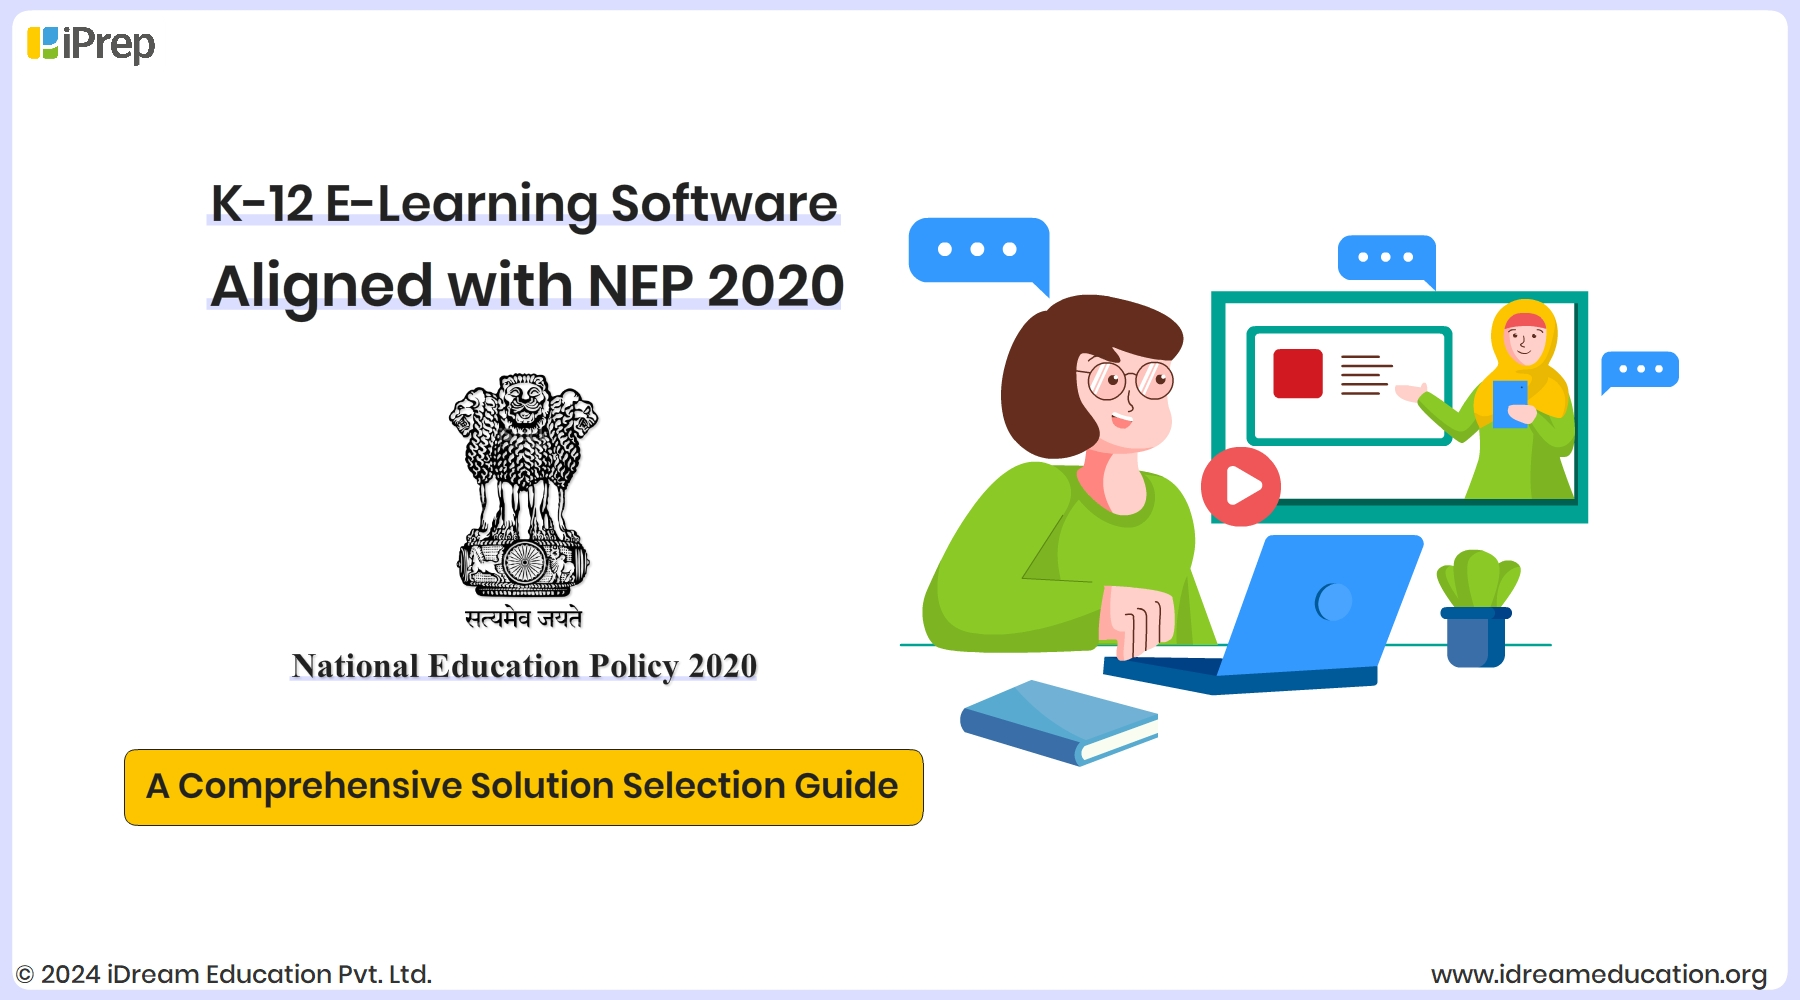 Illustration of K-12 E-Learning software aligned with NEP 2020 guidelines